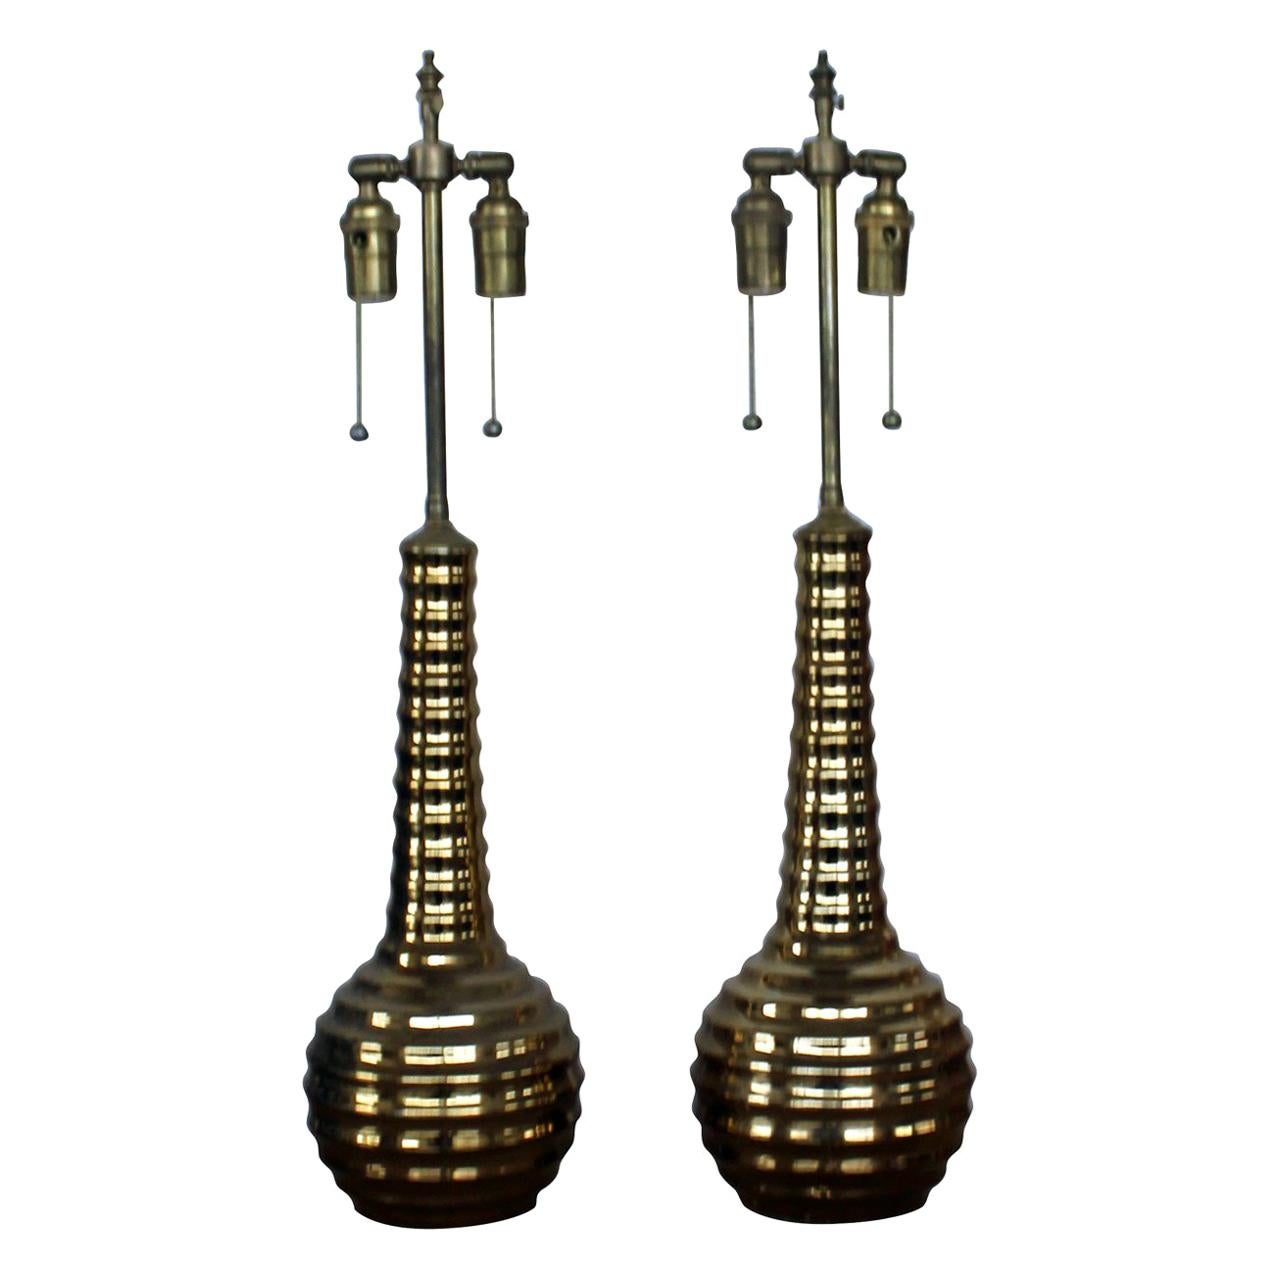 Pair of Mid century modern gold glass vases with lamp application